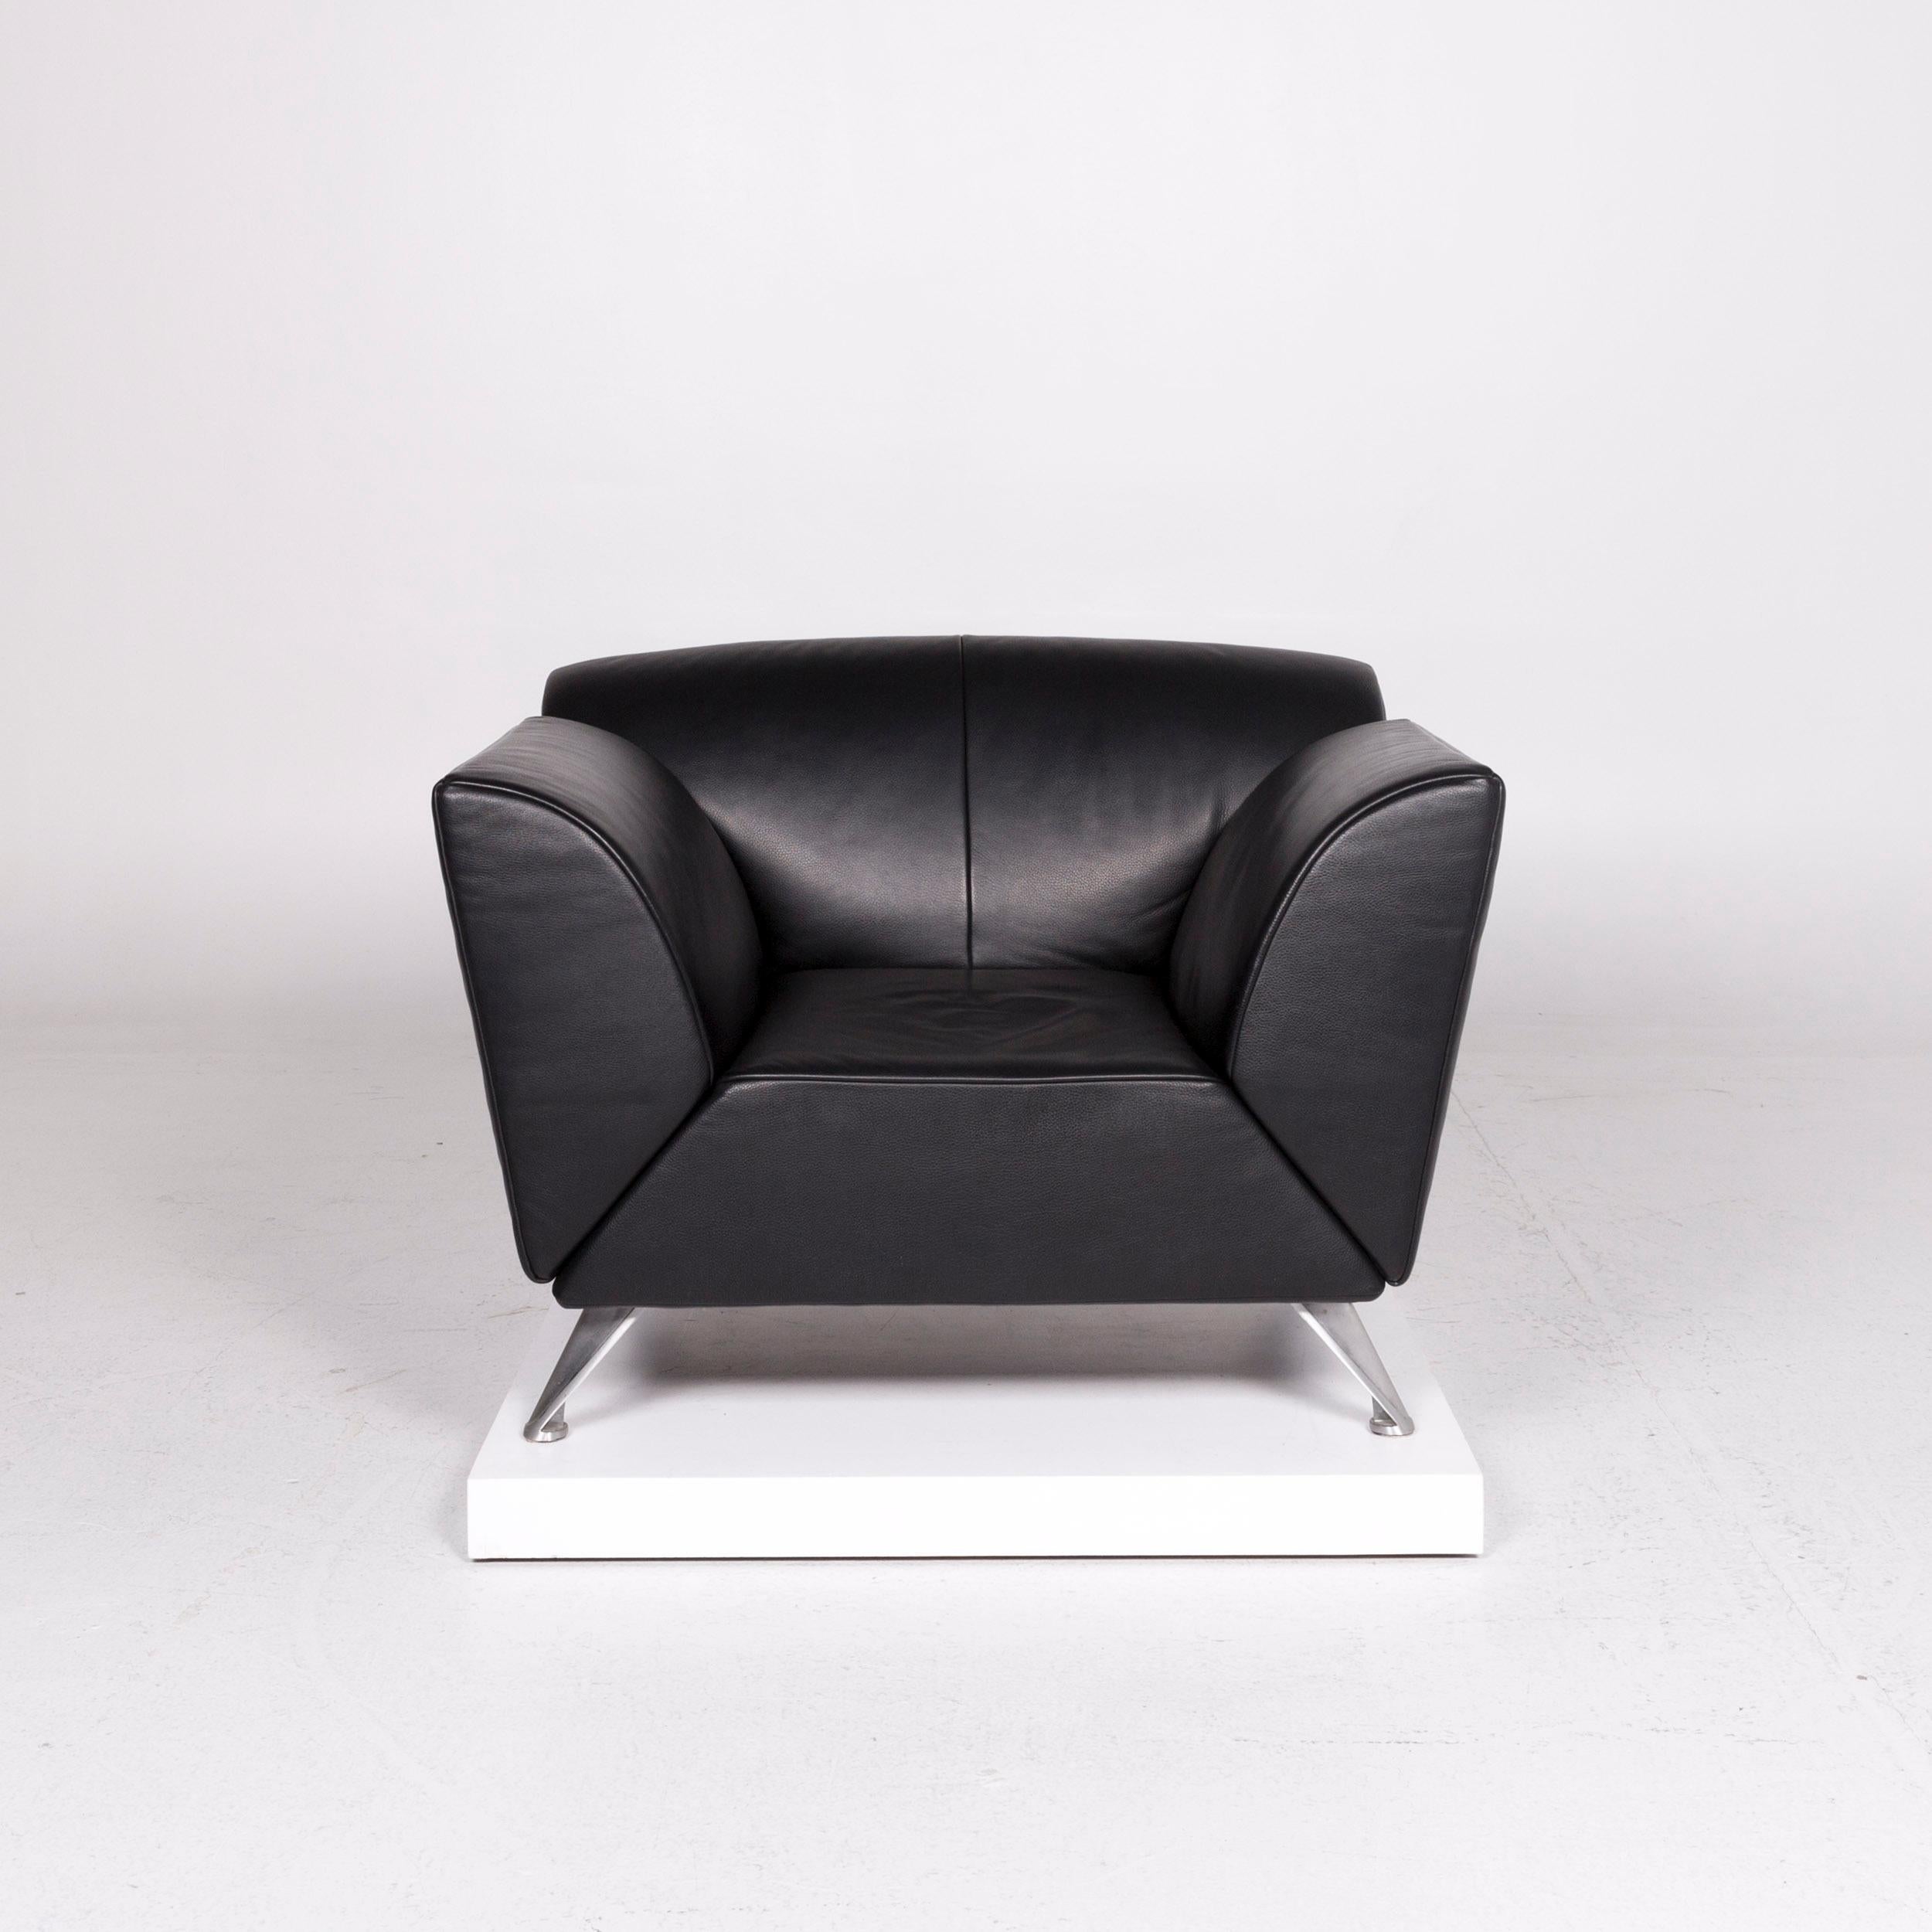 We bring to you a Jori JR-8100 leather armchair black.
 

 Product measurements in centimeters:
 

Depth 85
Width 106
Height 76
Seat-height 41
Rest-height 68
Seat-depth 55
Seat-width 46
Back-height 36.
 